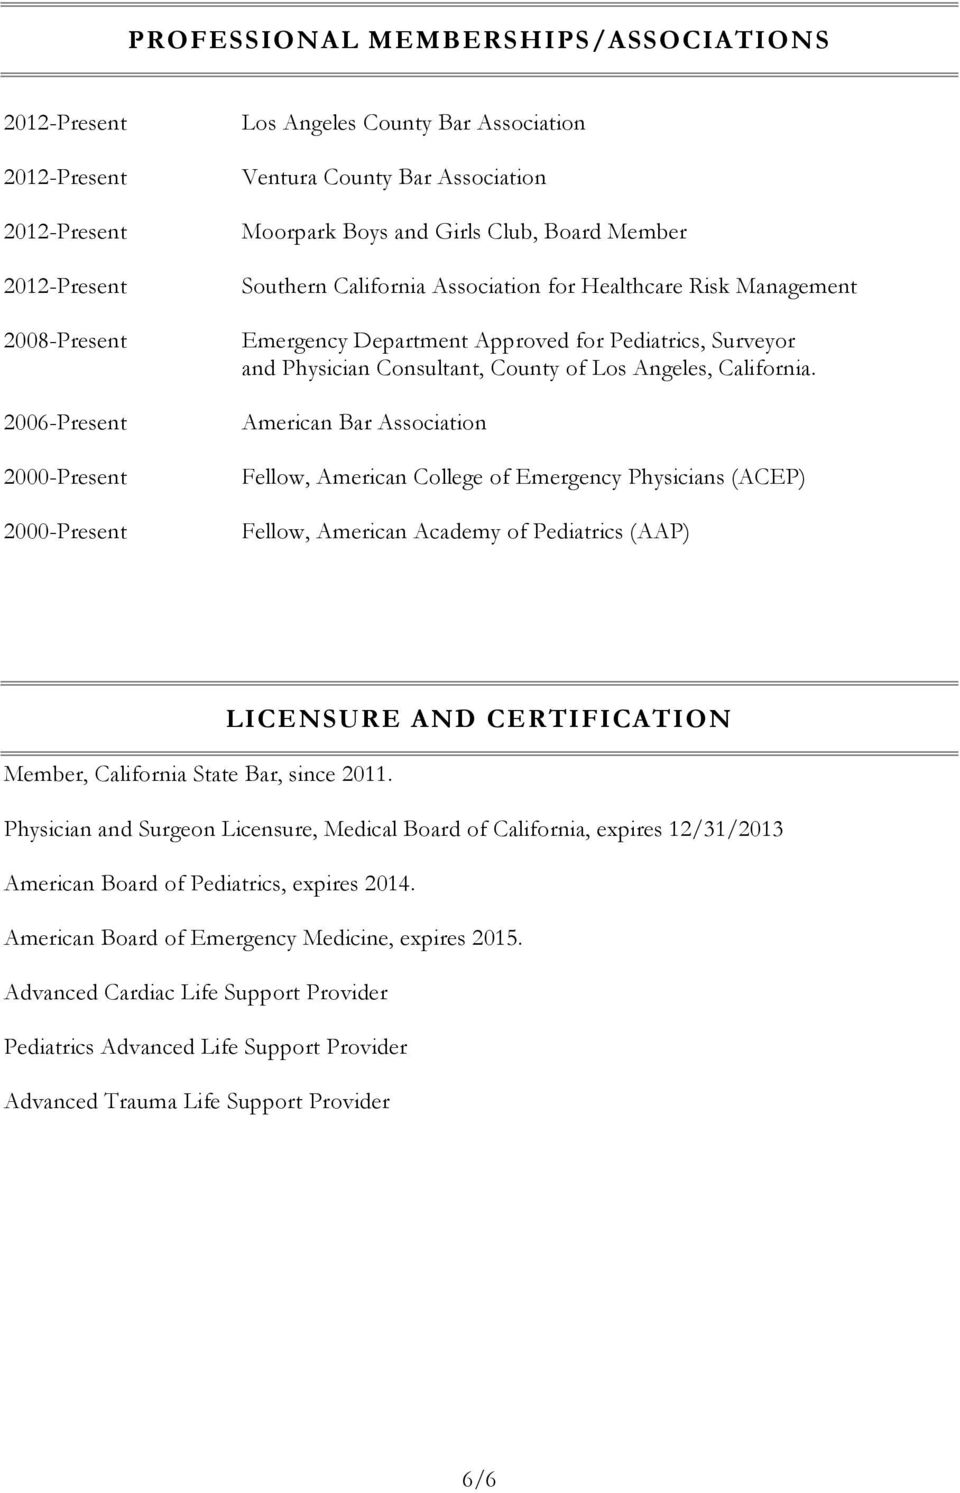 American Bar Association Fellow, American College of Emergency Physicians (ACEP) Fellow, American Academy of Pediatrics (AAP) LICENSURE AND CERTIFICATION Member, California State Bar, since 2011.